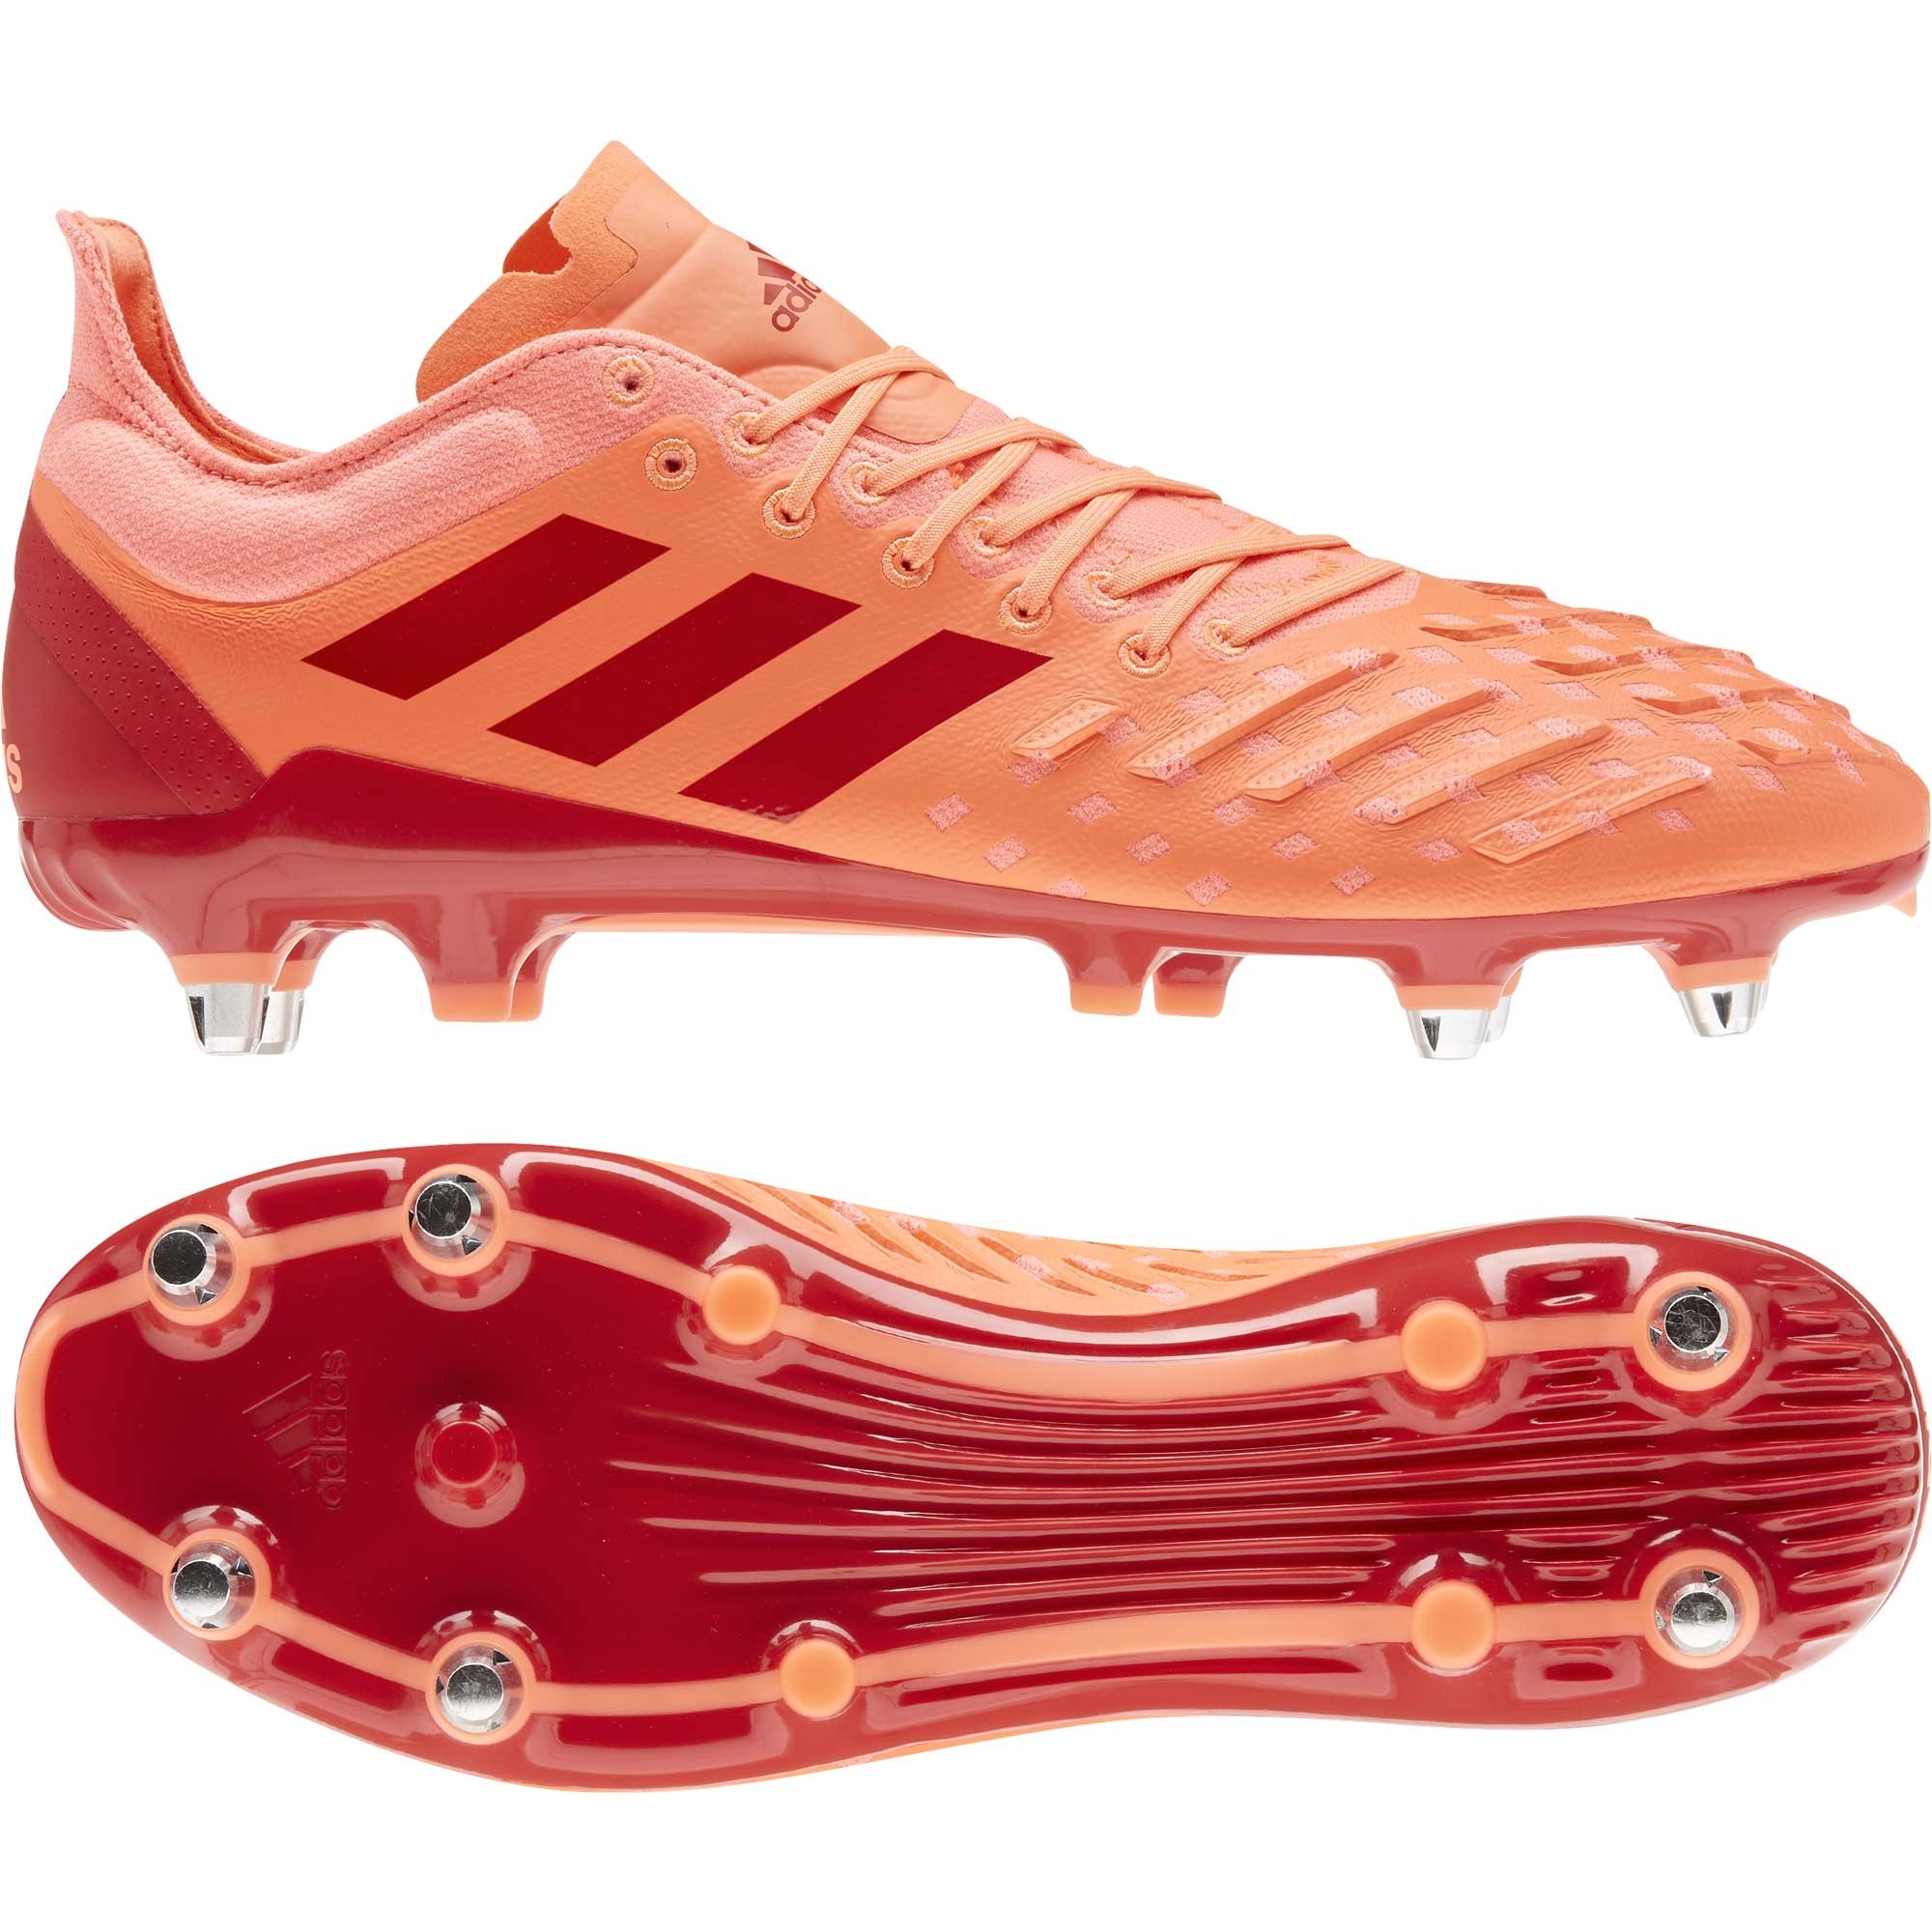 adidas rugby crampons